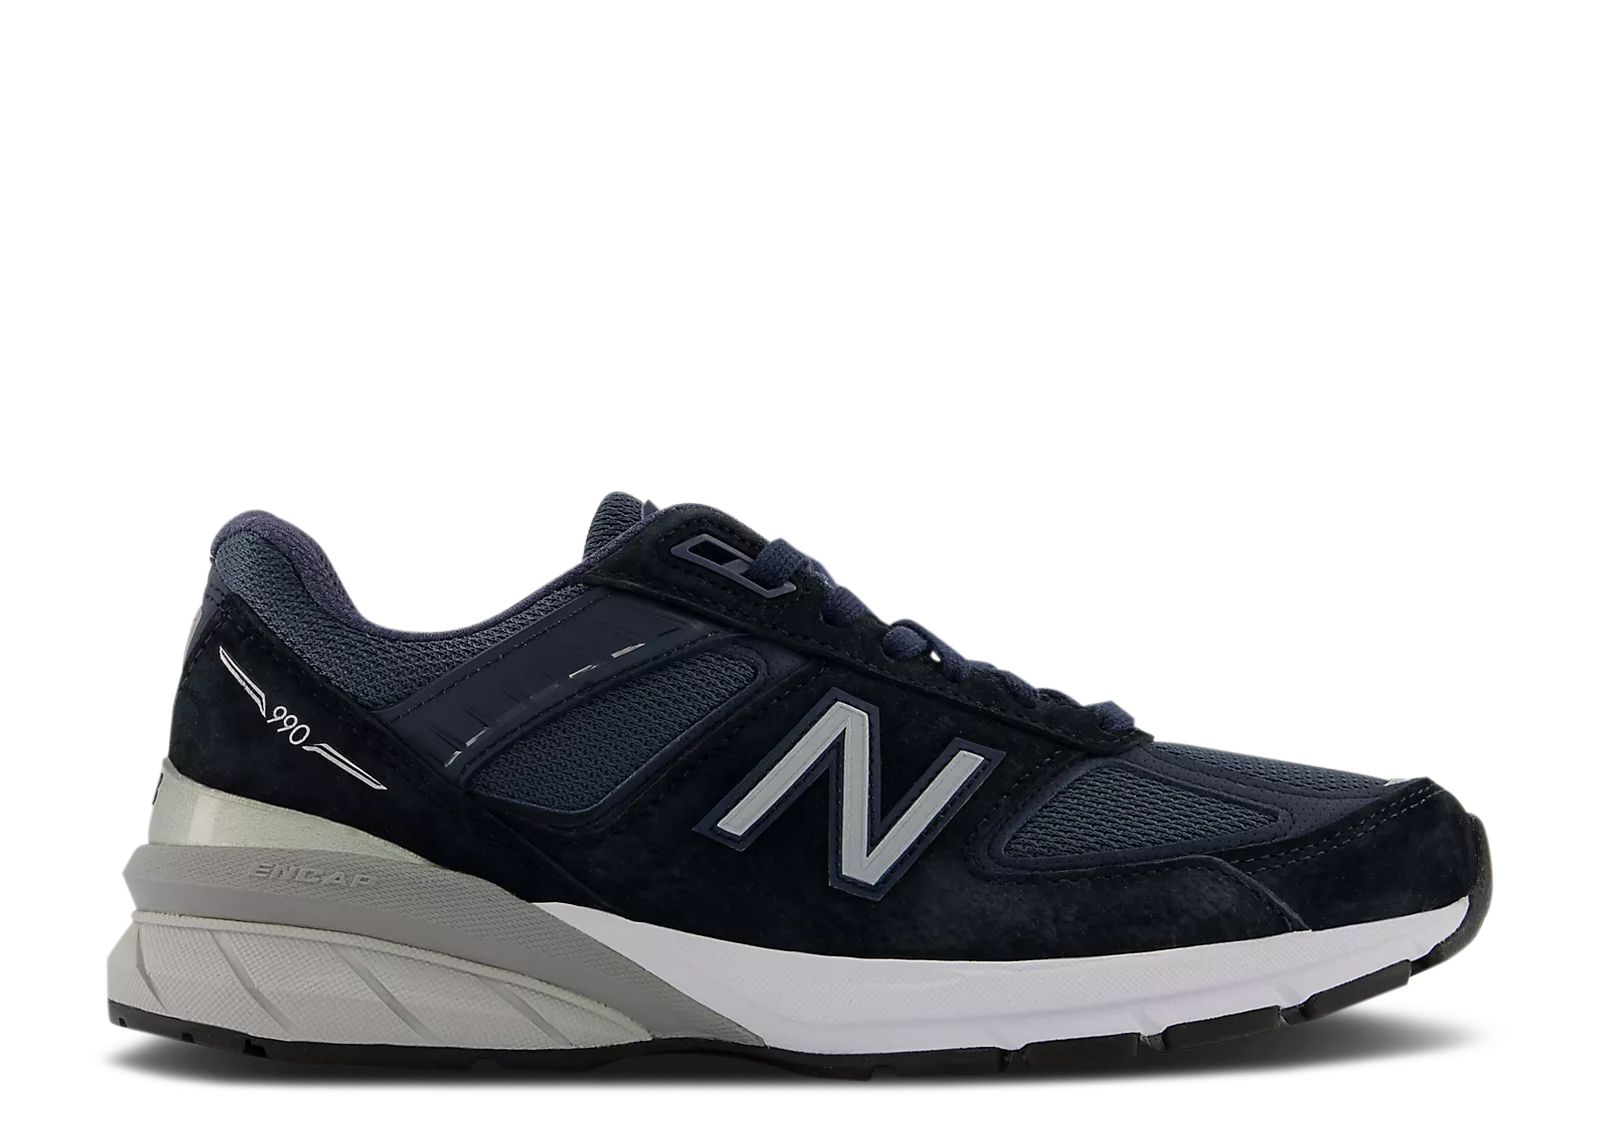 Wmns 990v5 Made In USA 'Navy Silver' - New Balance - W990NV5